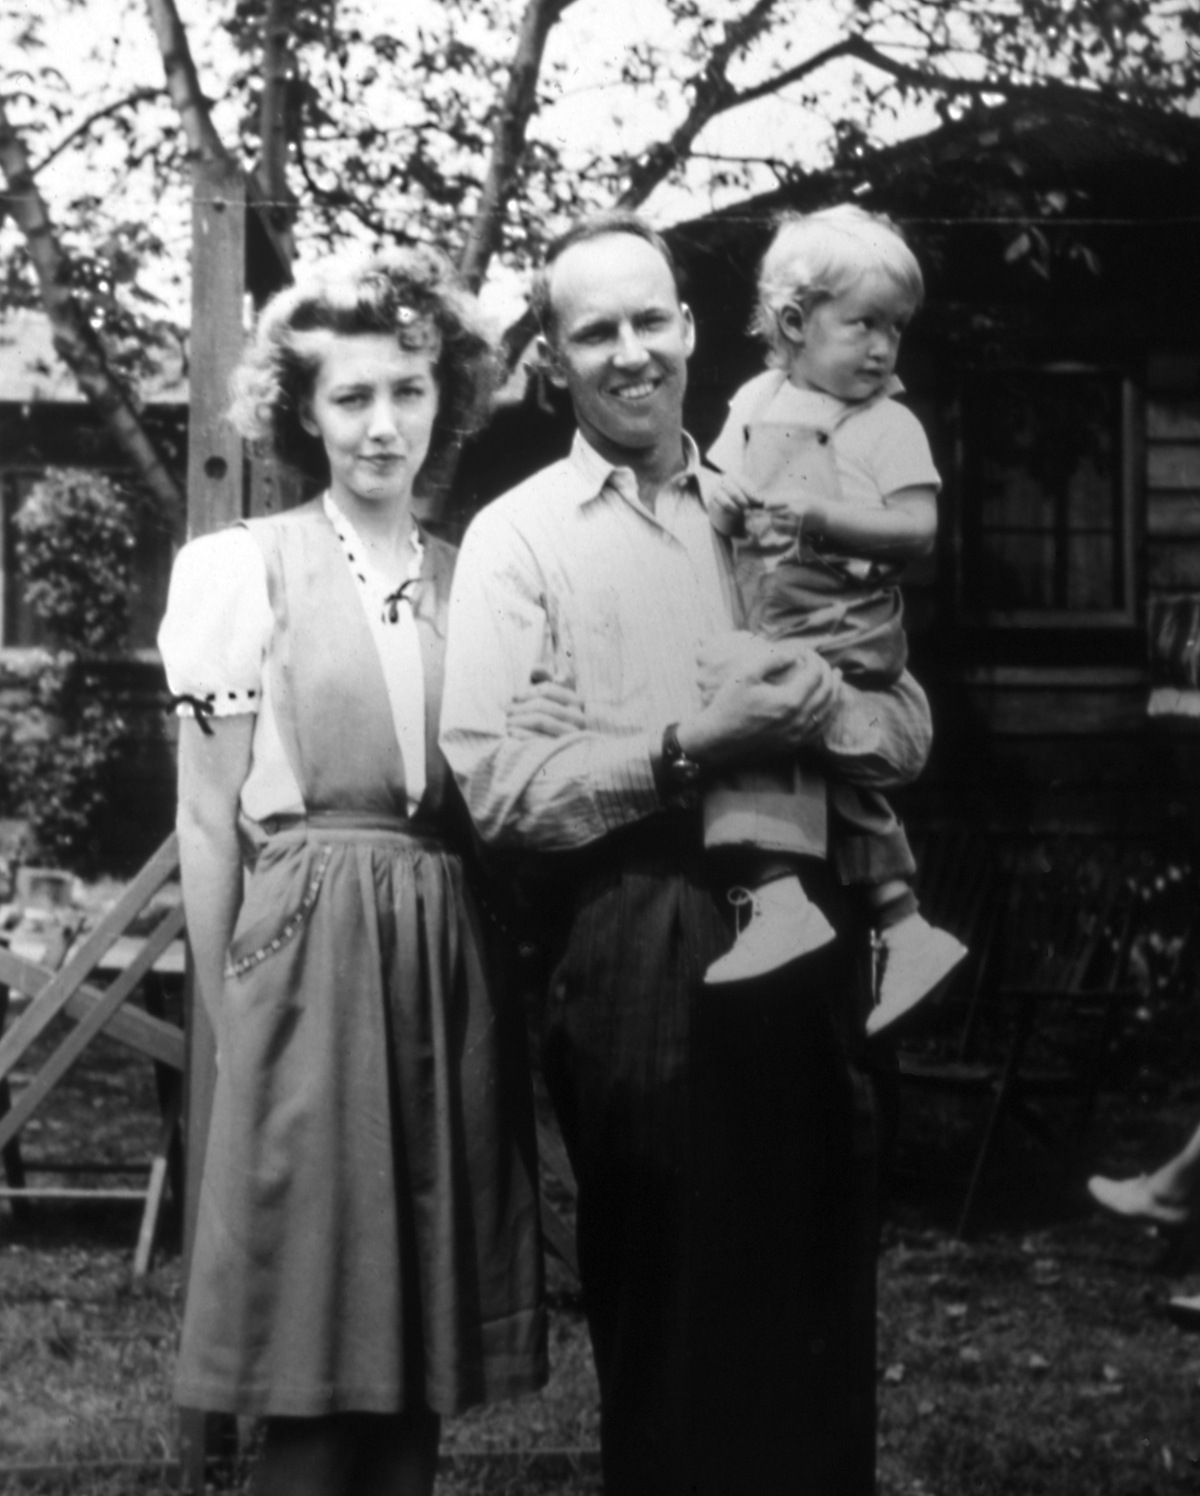 Ruth at age 2 with her mother Arliss and father George Milligan in Glendale, CA.